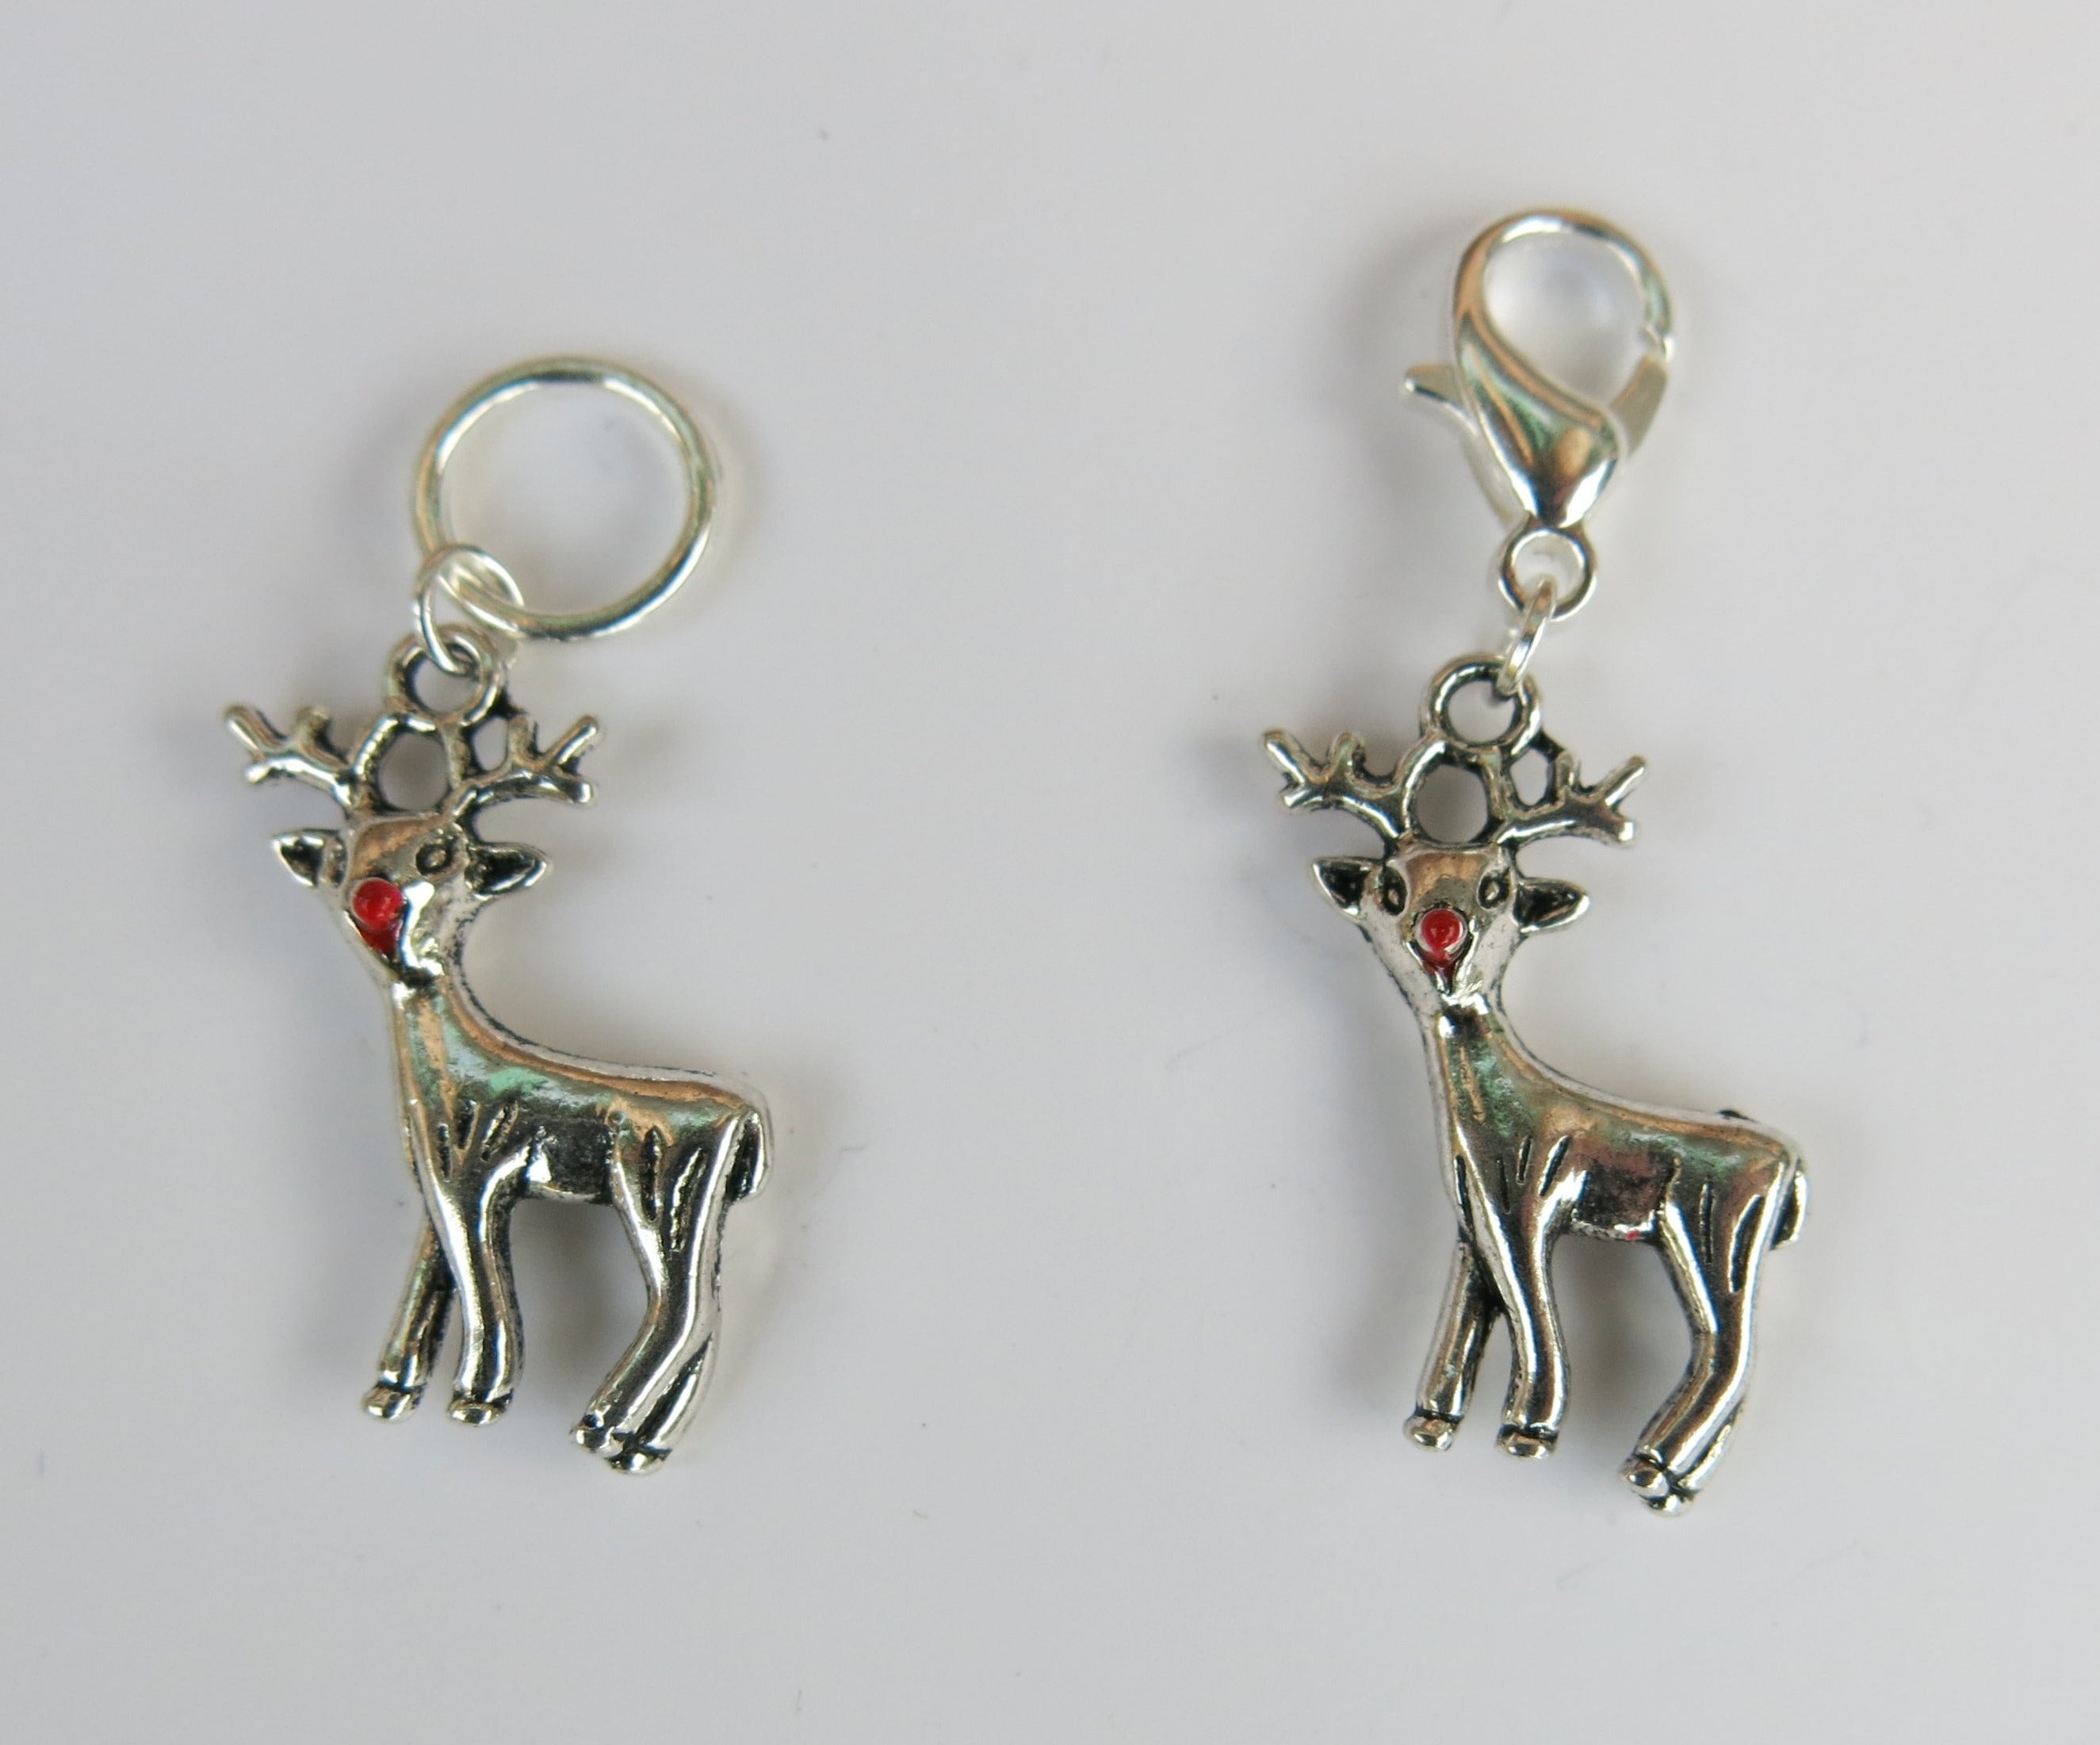 3D Rudolph the Red Nosed Reindeer Snagless Stitch Marker or Clasp Place Keeper